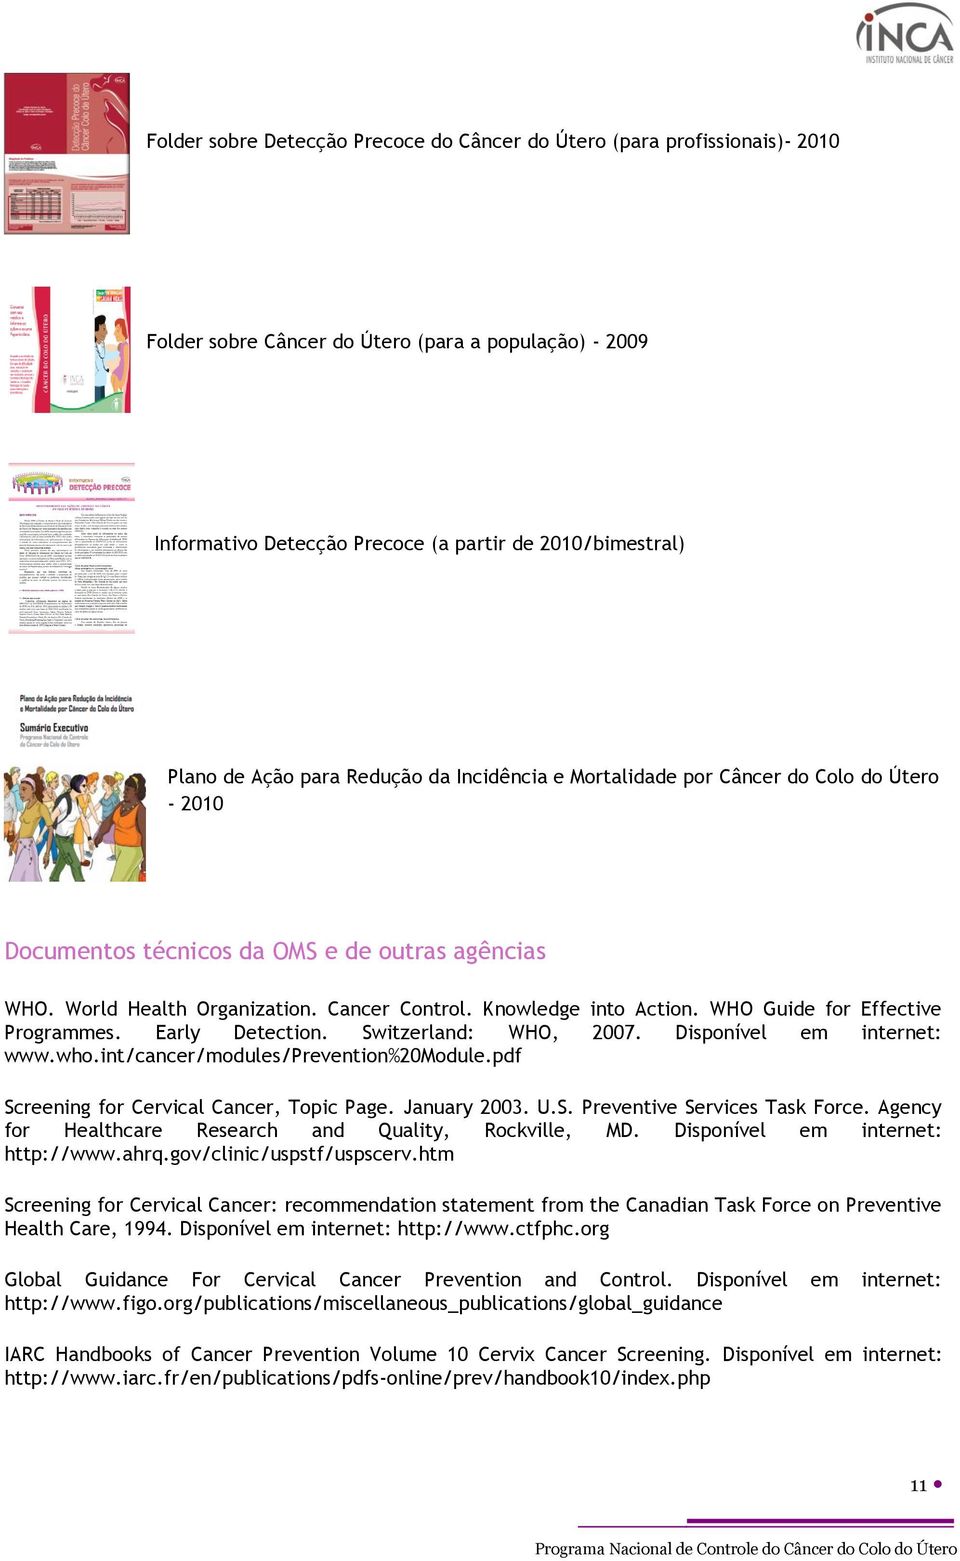 WHO Guide for Effective Programmes. Early Detection. Switzerland: WHO, 2007. Disponível em internet: www.who.int/cancer/modules/prevention%20module.pdf Screening for Cervical Cancer, Topic Page.